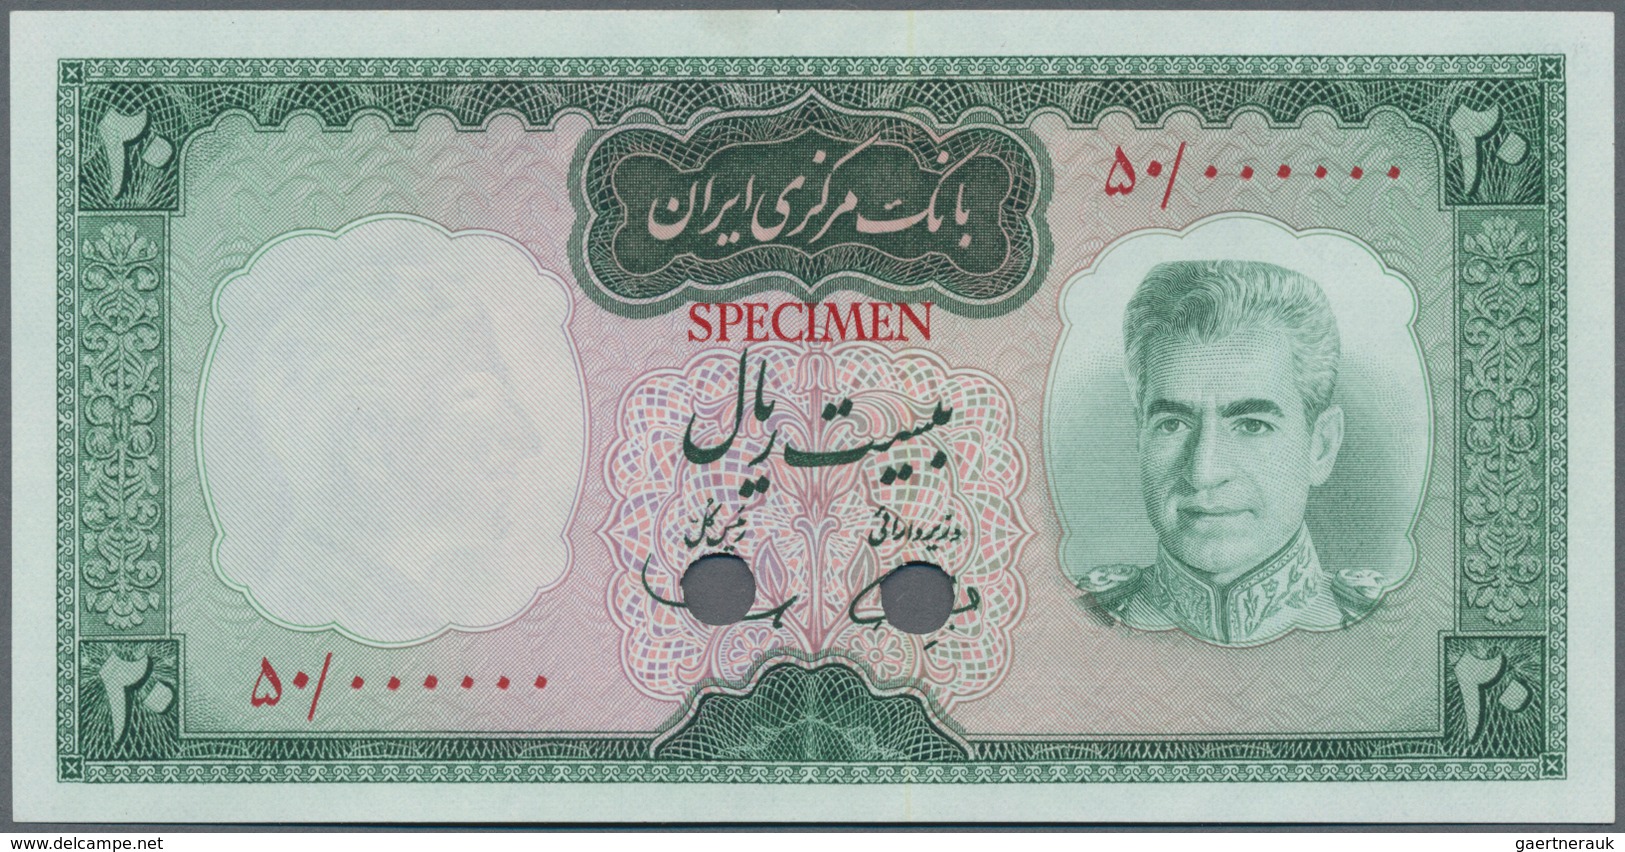 Iran: 20 Rials ND(1970) Specimen P. 85s With Zero Serial Numbers, Red Specimen Overprint And Cancell - Irán